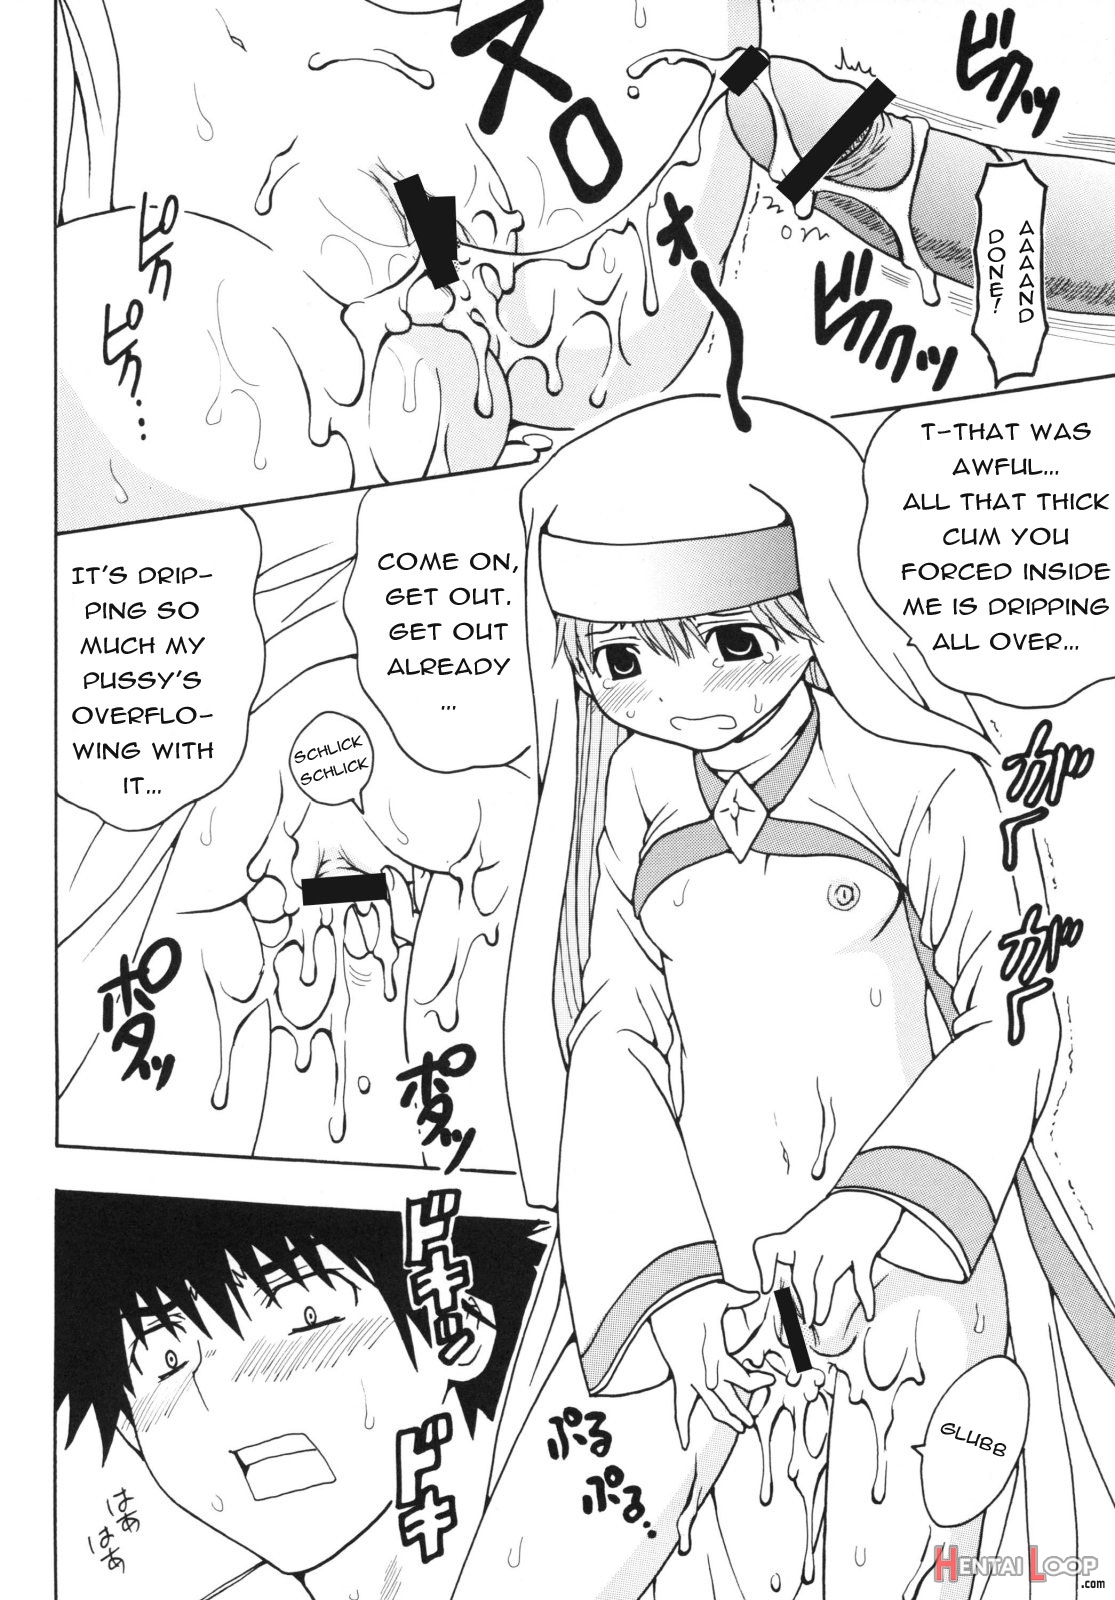 A Certain Magical Lewd Index #2 page 42